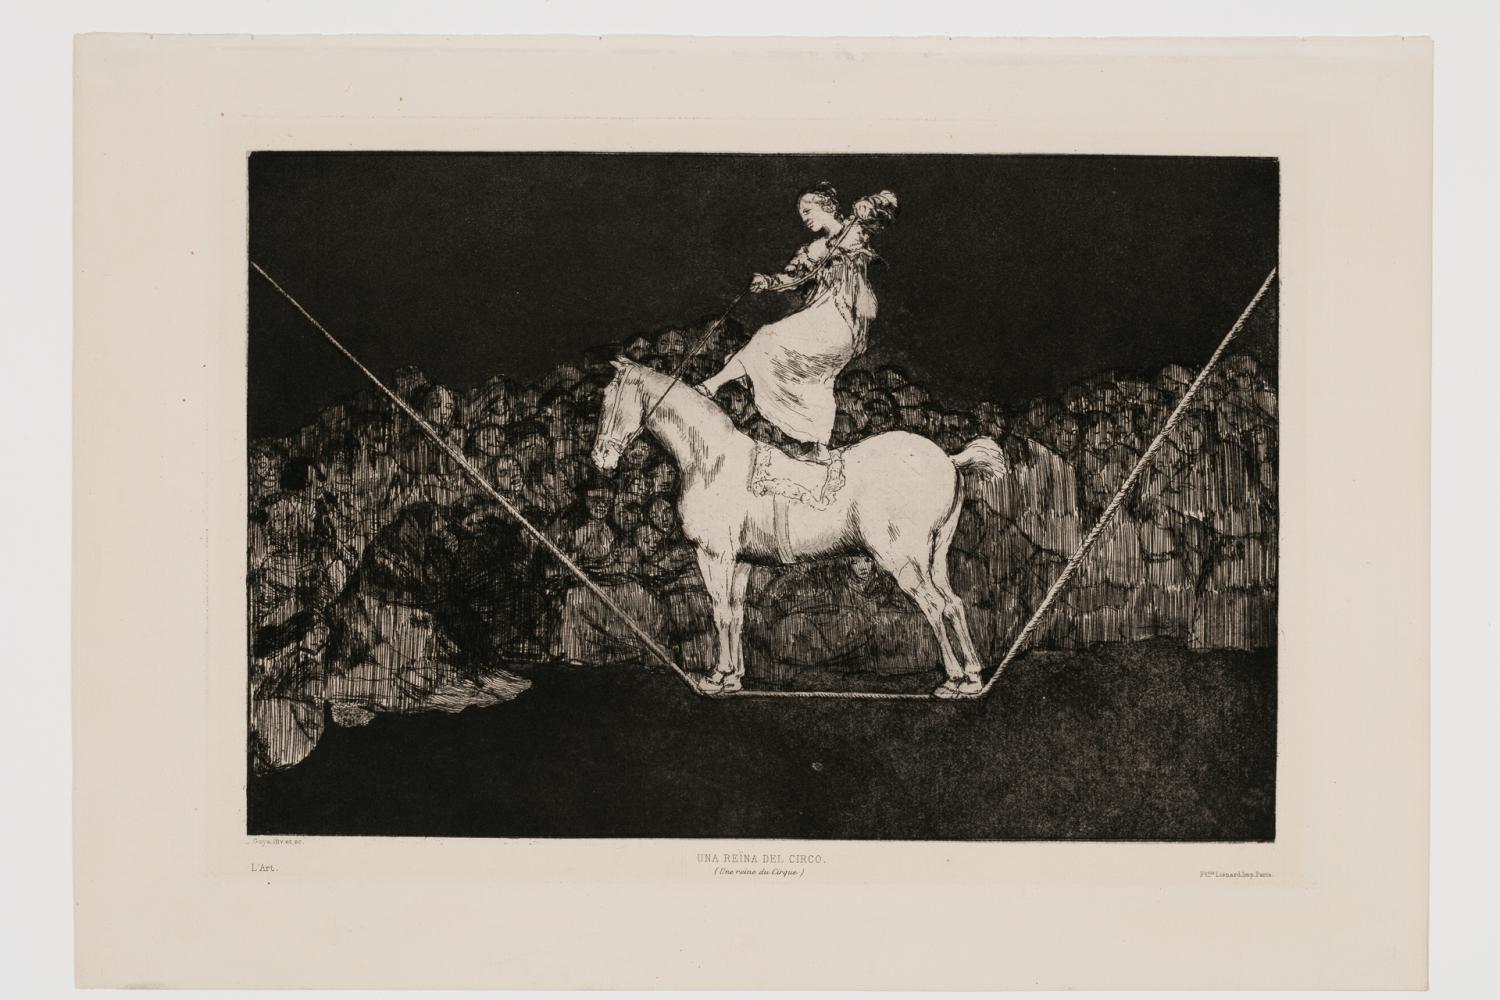 A black and white print featuring a woman balancing atop a horse, who is balancing atop a tightrope.